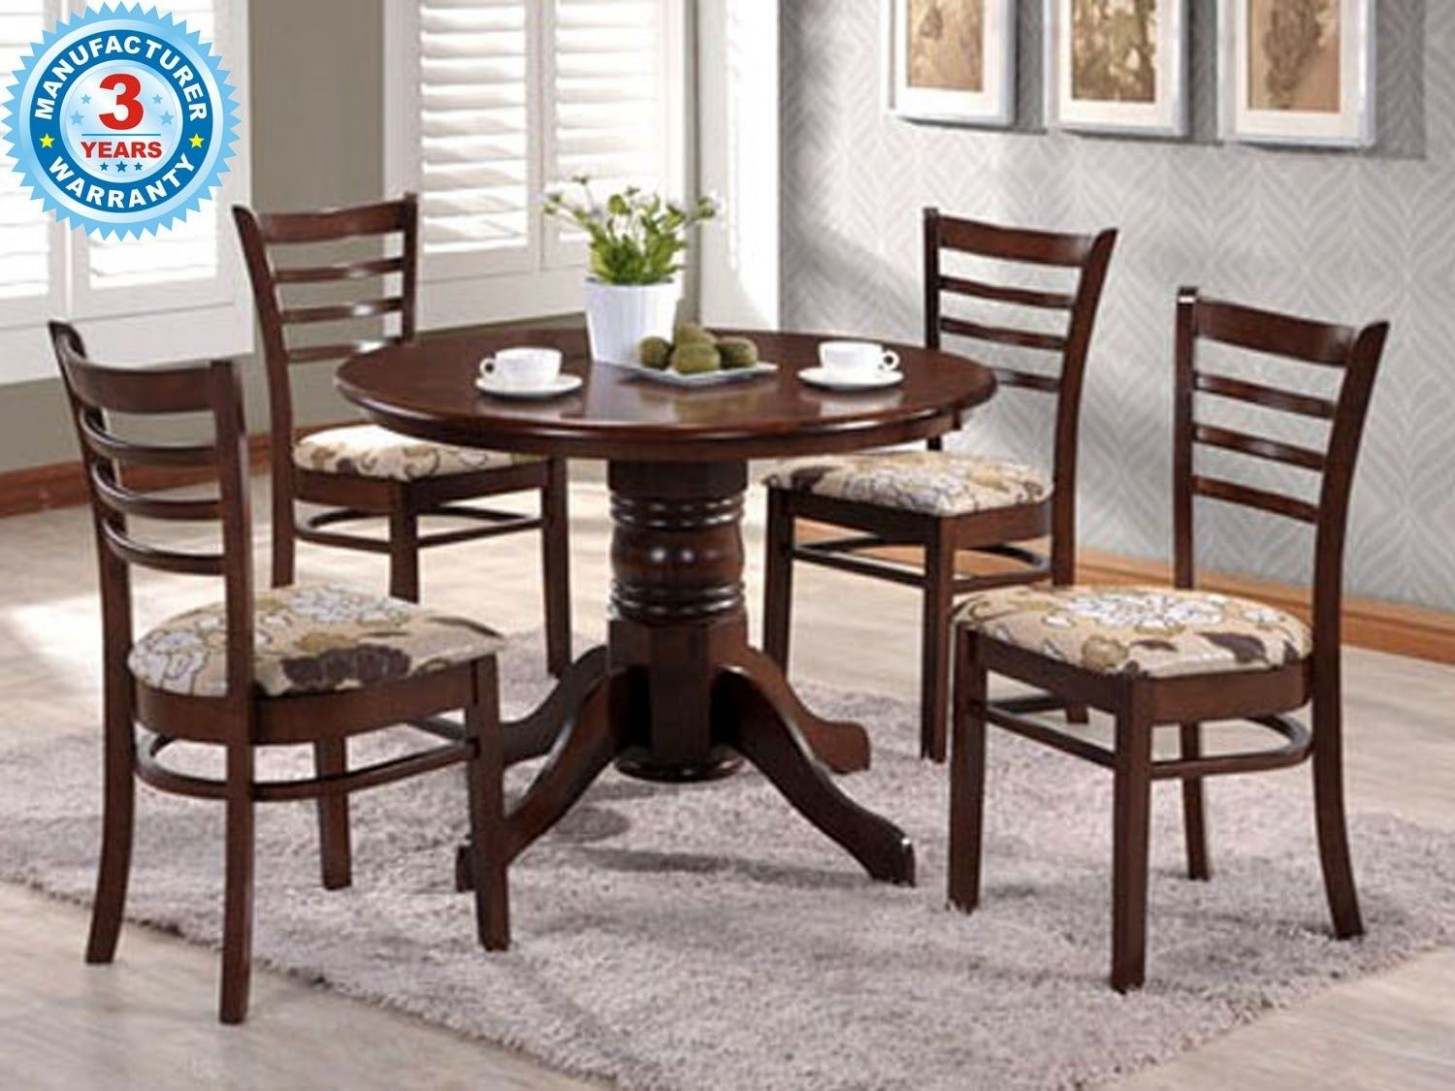 Center Table Design Olx Home And Furniture with regard to dimensions 1455 X 1091